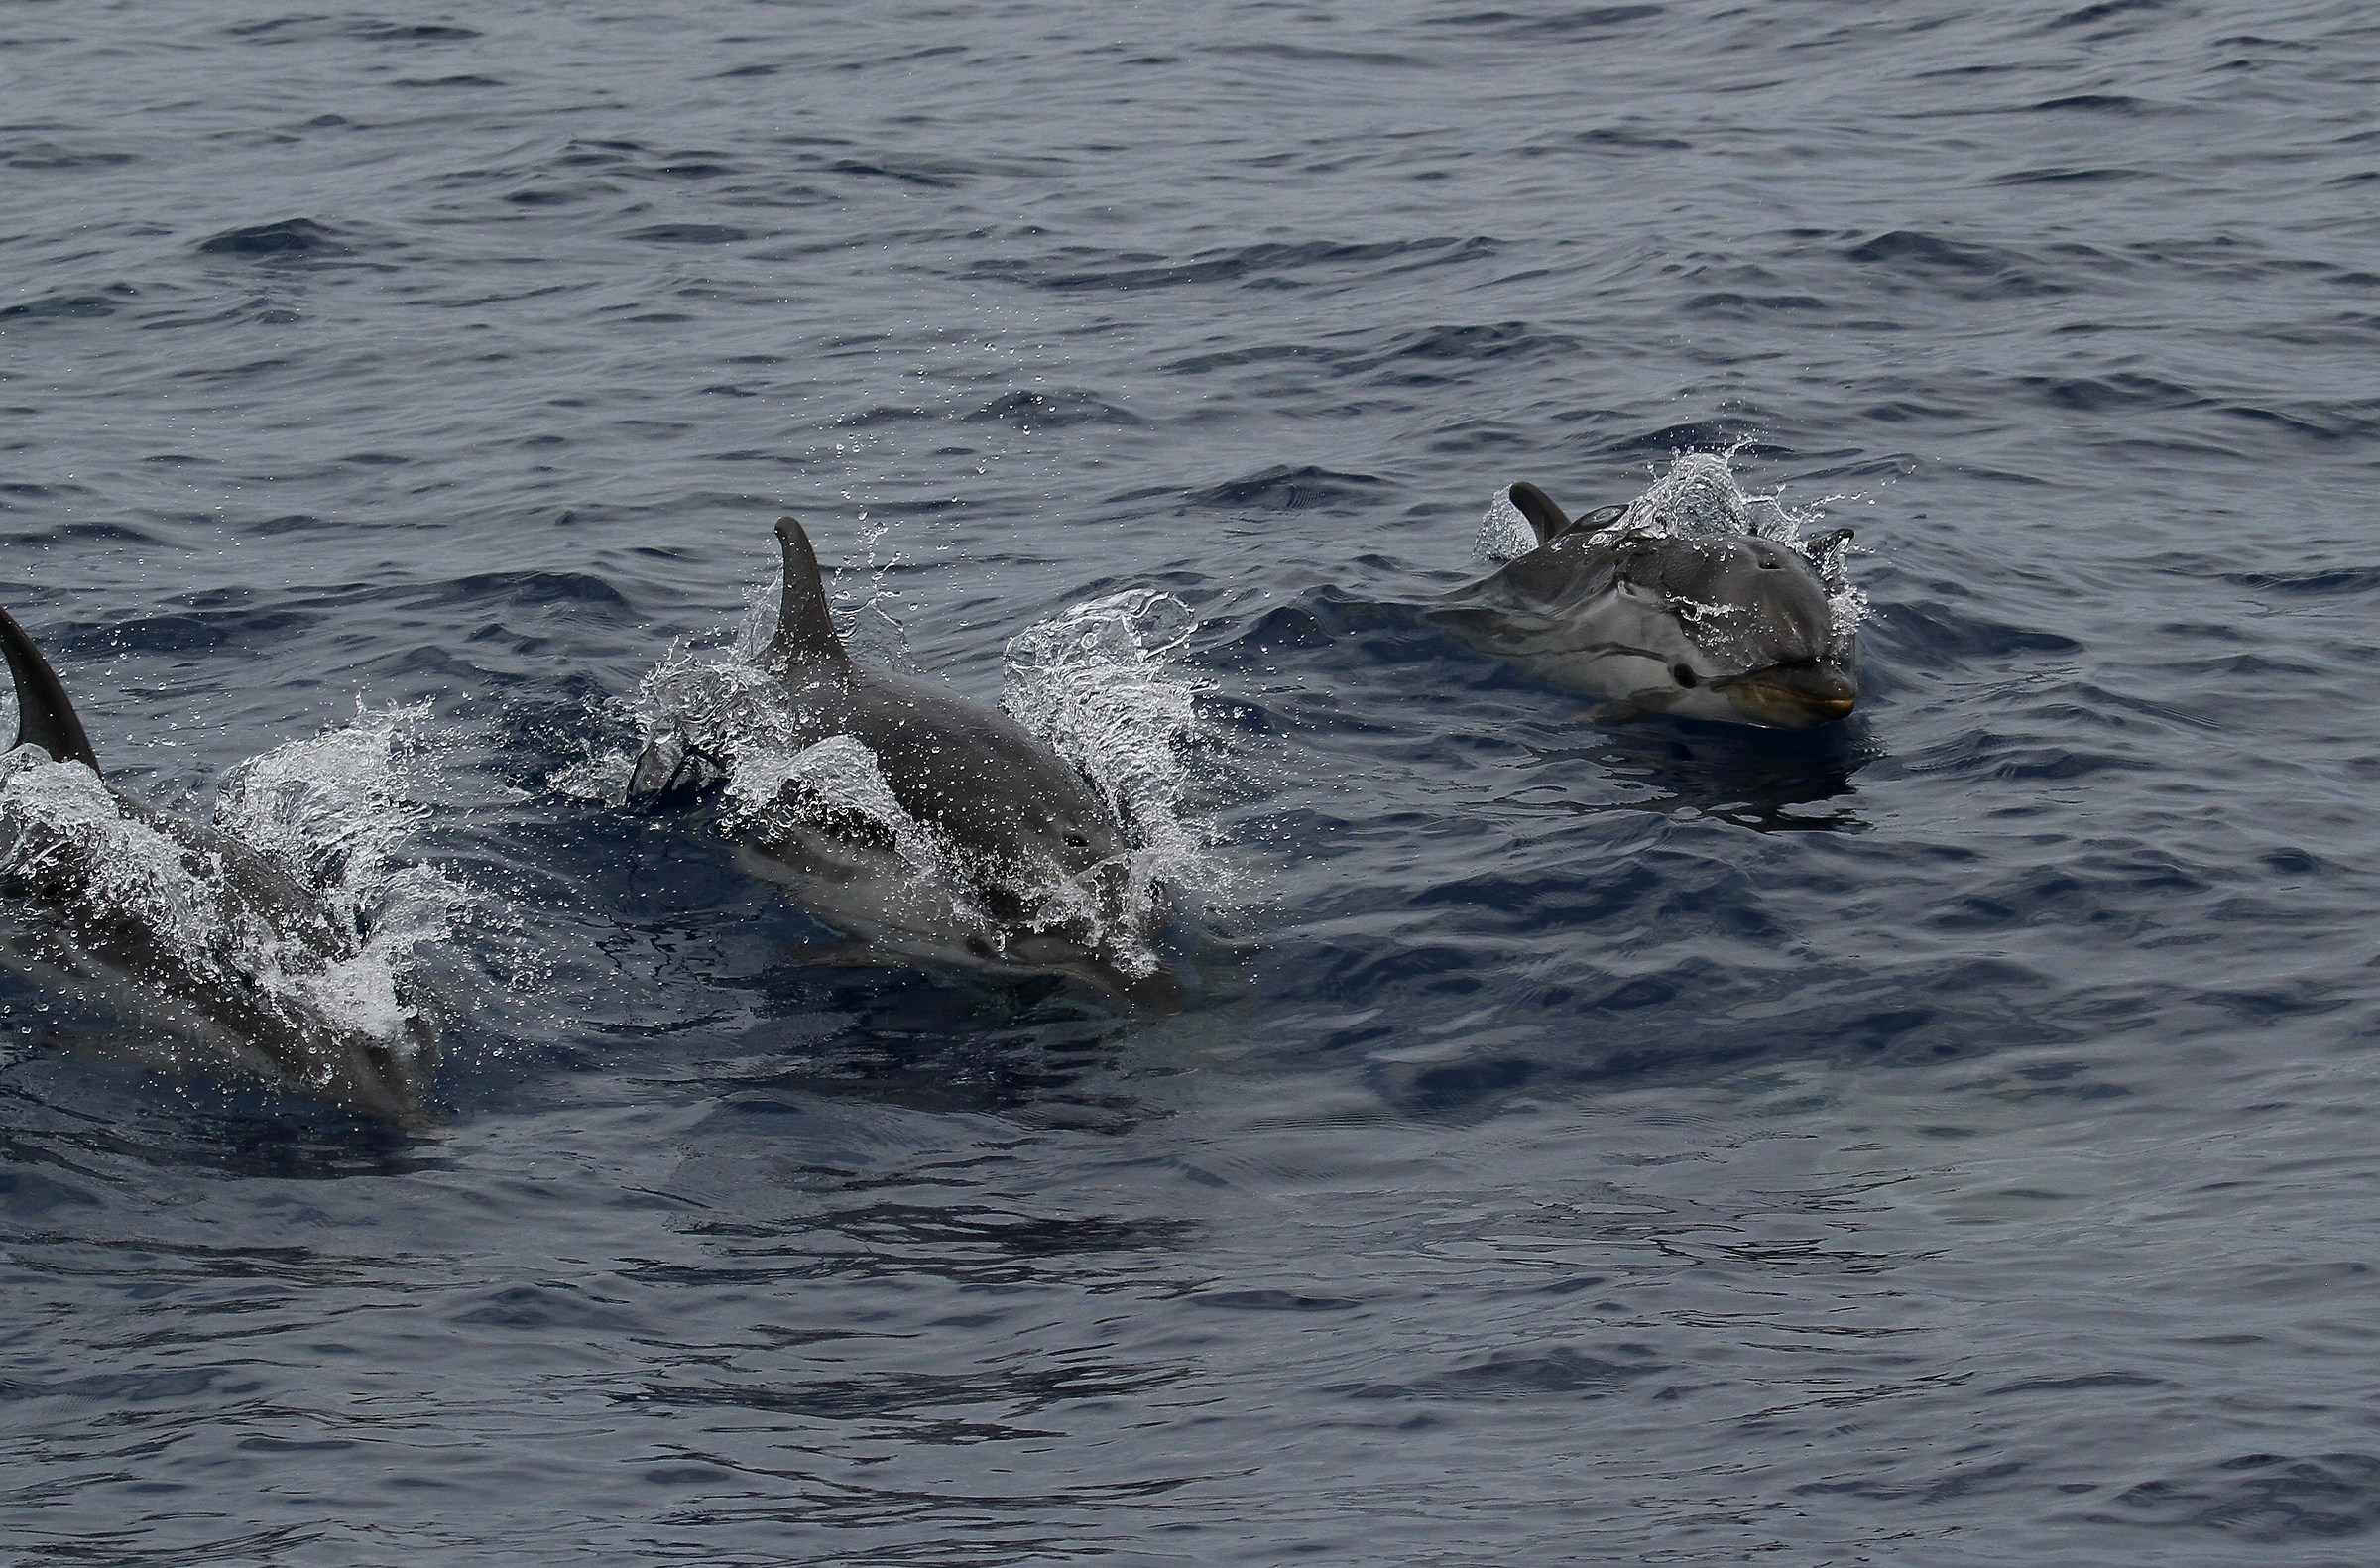 Striped dolphins in the company...